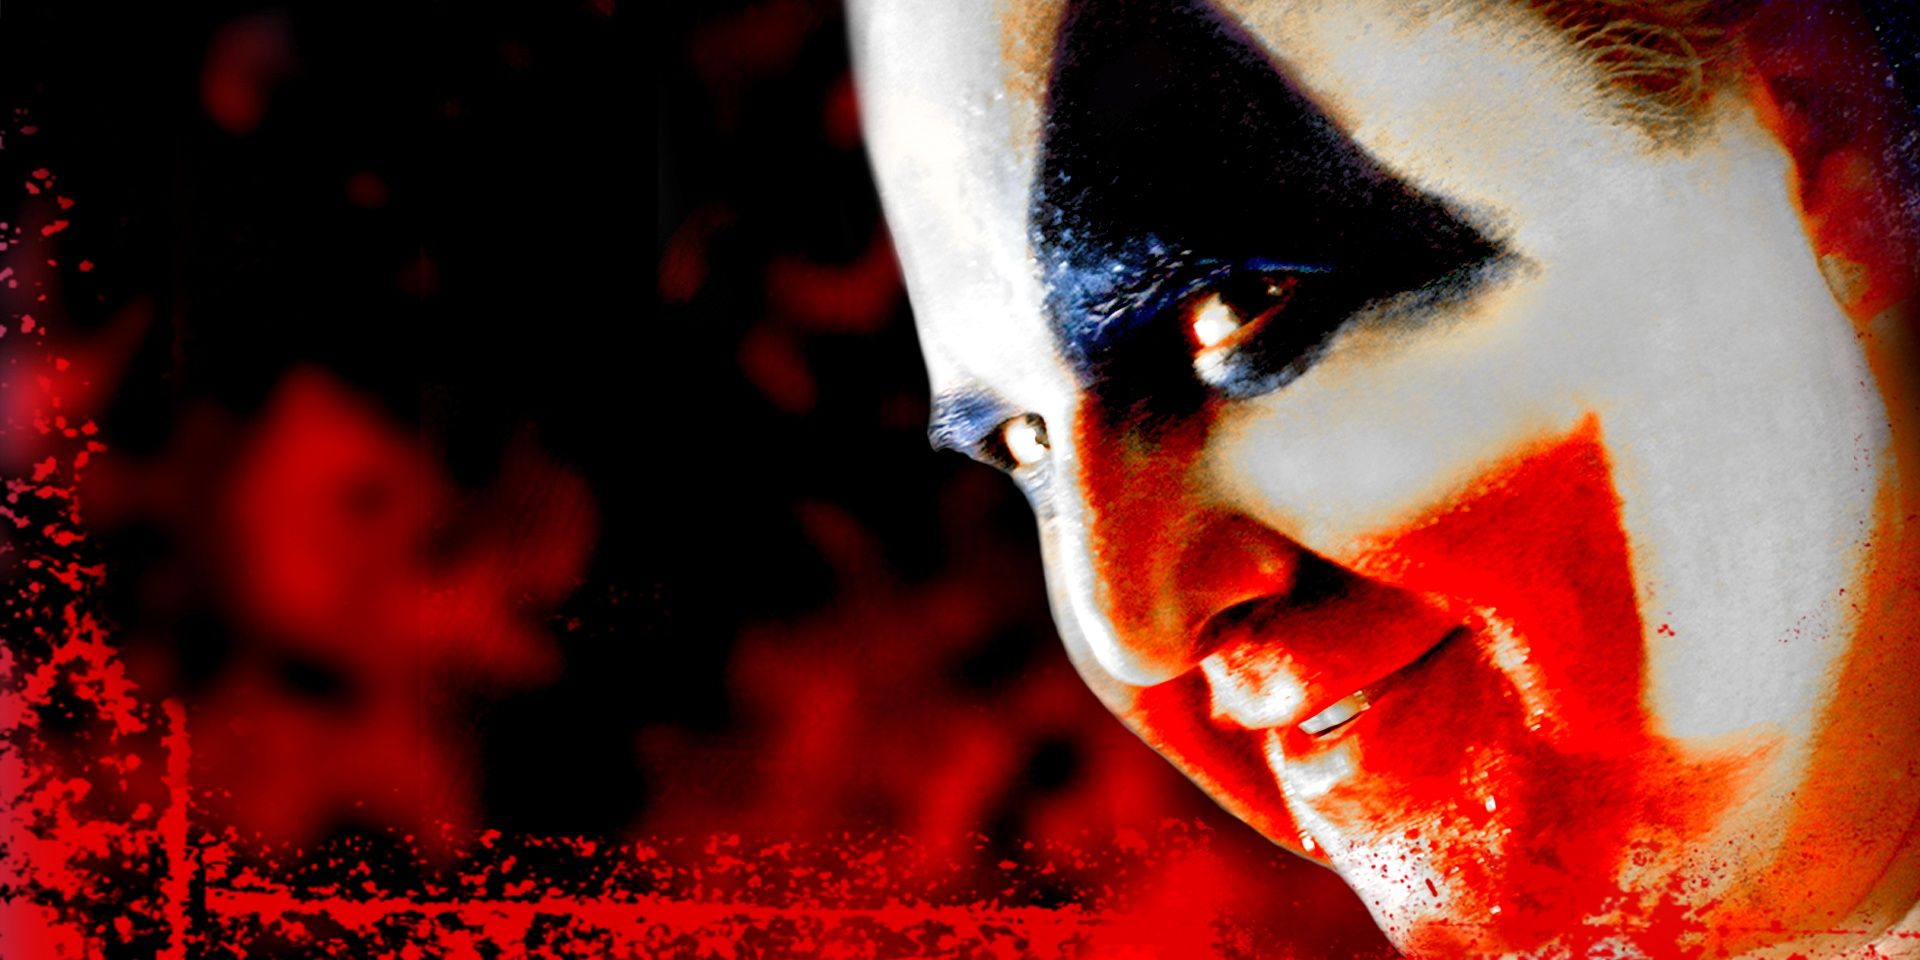 Promotional Image for 2003s Gacy